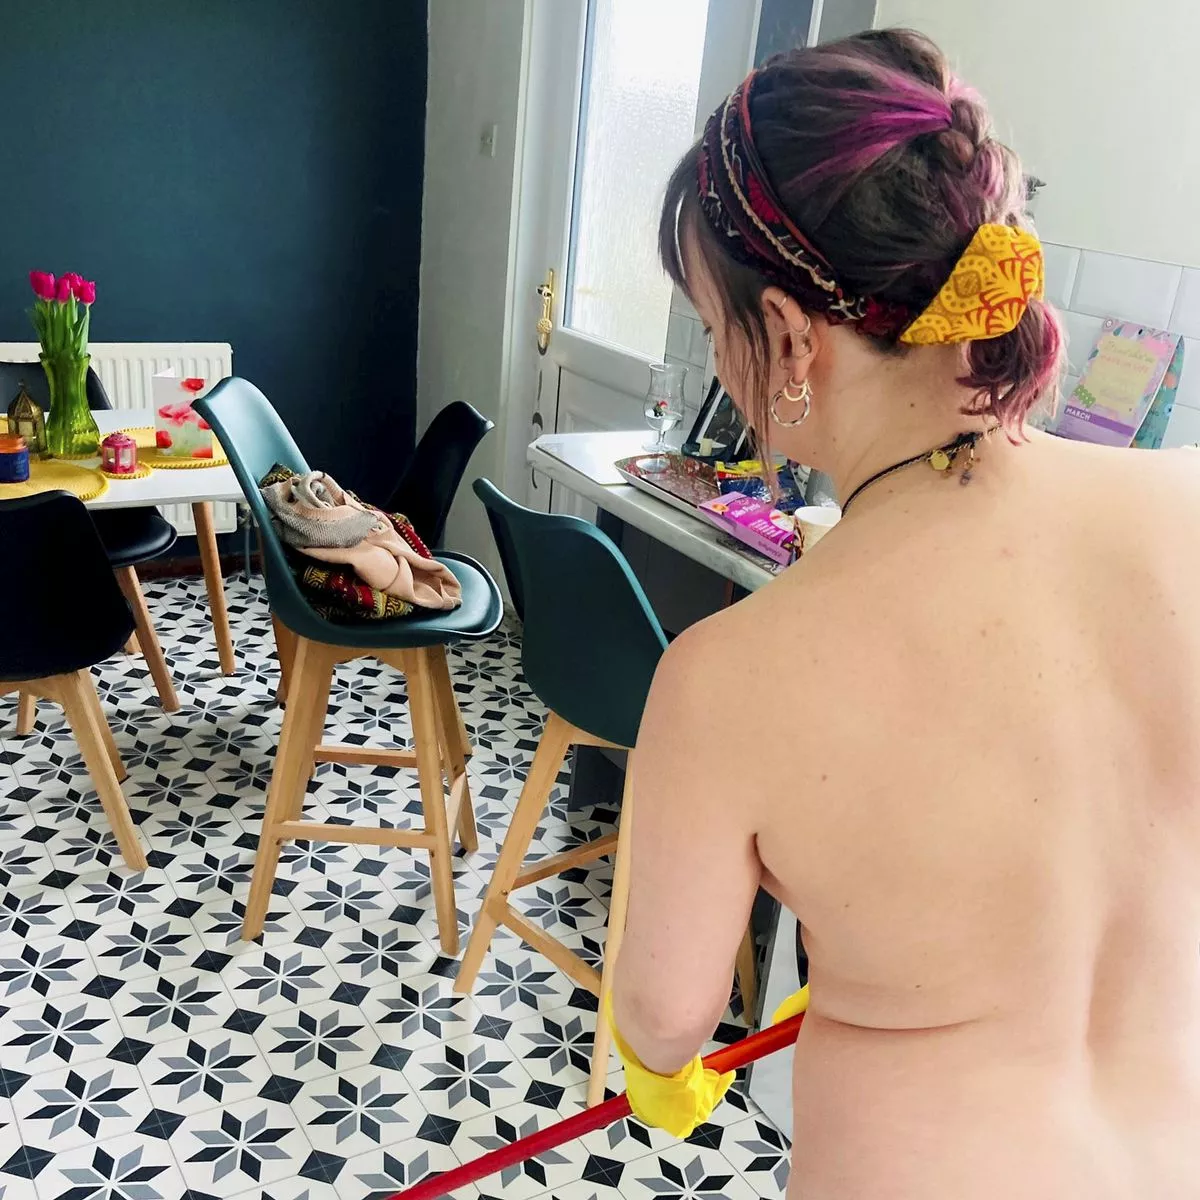 doc phil add nude housecleaning photo